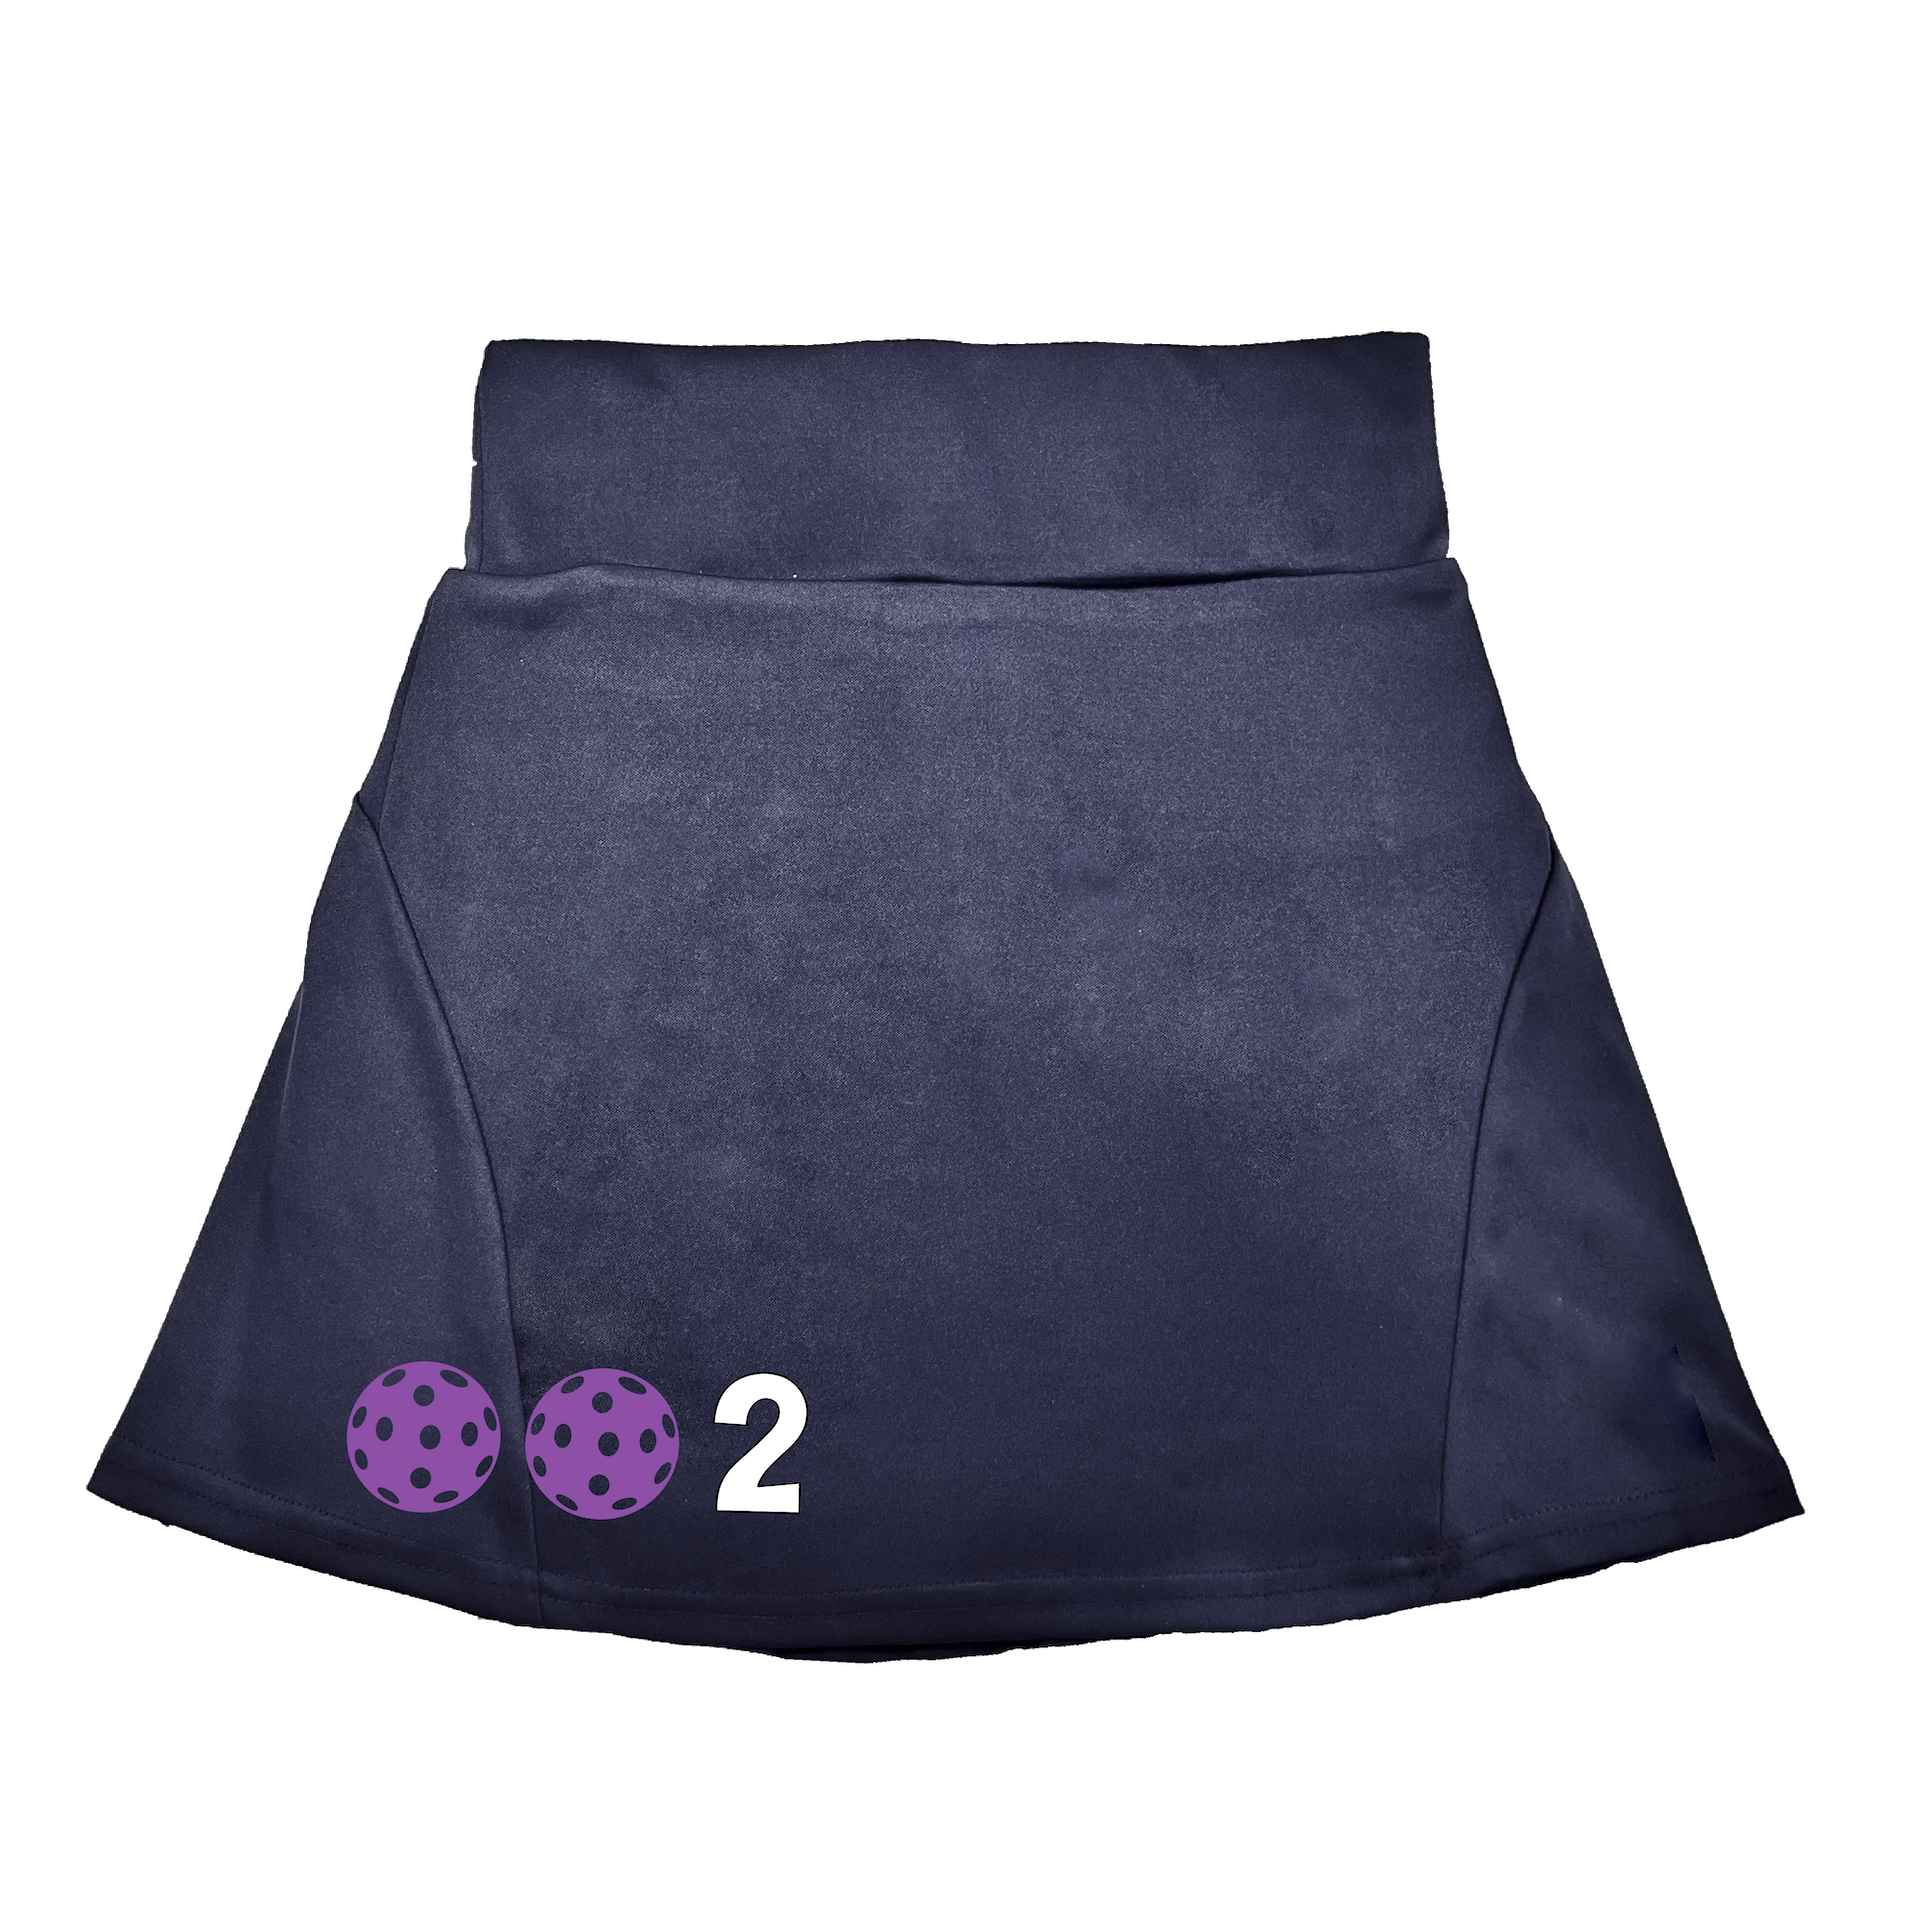 Pickleball 002 Customizable Ball color:  Choose: Cyan , Purple or Rainbow.  Pickleball Flirty These flirty skorts have a flat mid-rise waistband with a 3-inch waistband.  Light weight without being see through and the material wicks away moisture quickly.  Flirty pleats in the back with inner shorts for free movement and stylish coverage on the courts.  A functional zipper pocket on the back and two built in pockets on the shorts for convenient storage. The rear pleats are what make these skorts fabulous!  